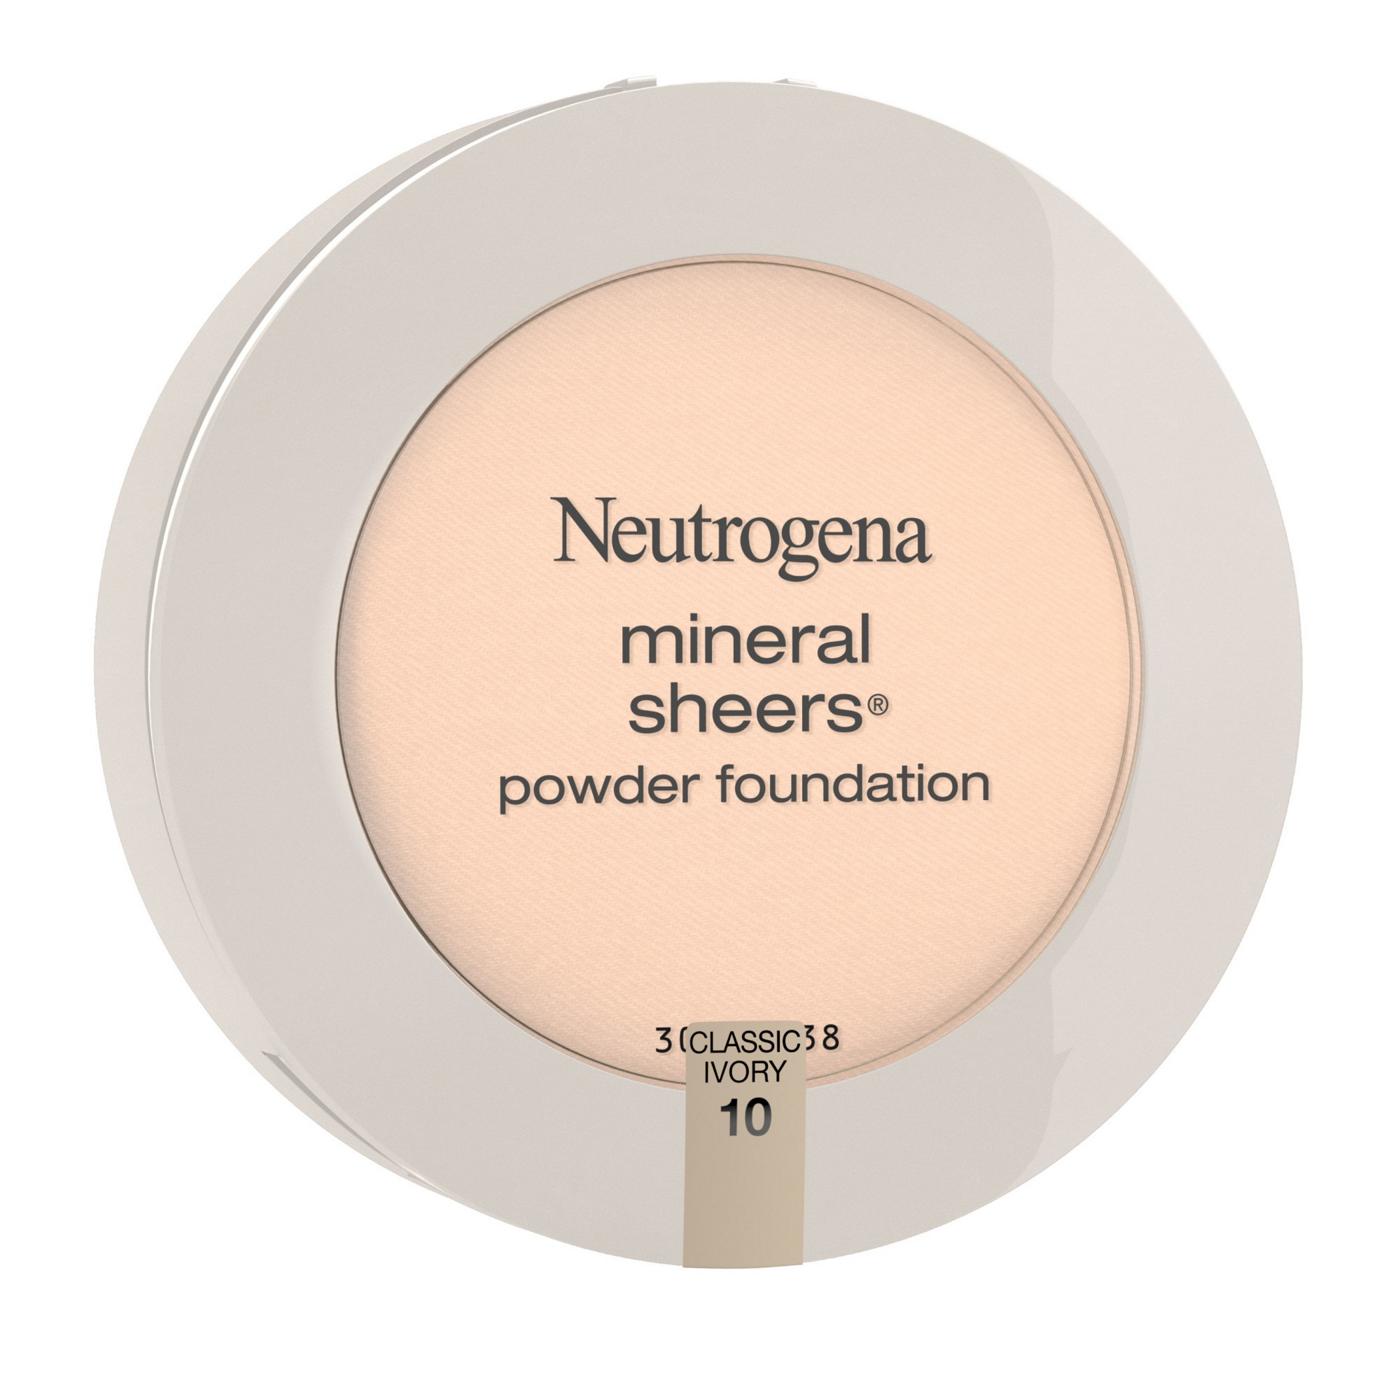 Neutrogena Mineral Sheers 10 Classic Ivory Compact Powder Foundation; image 4 of 6